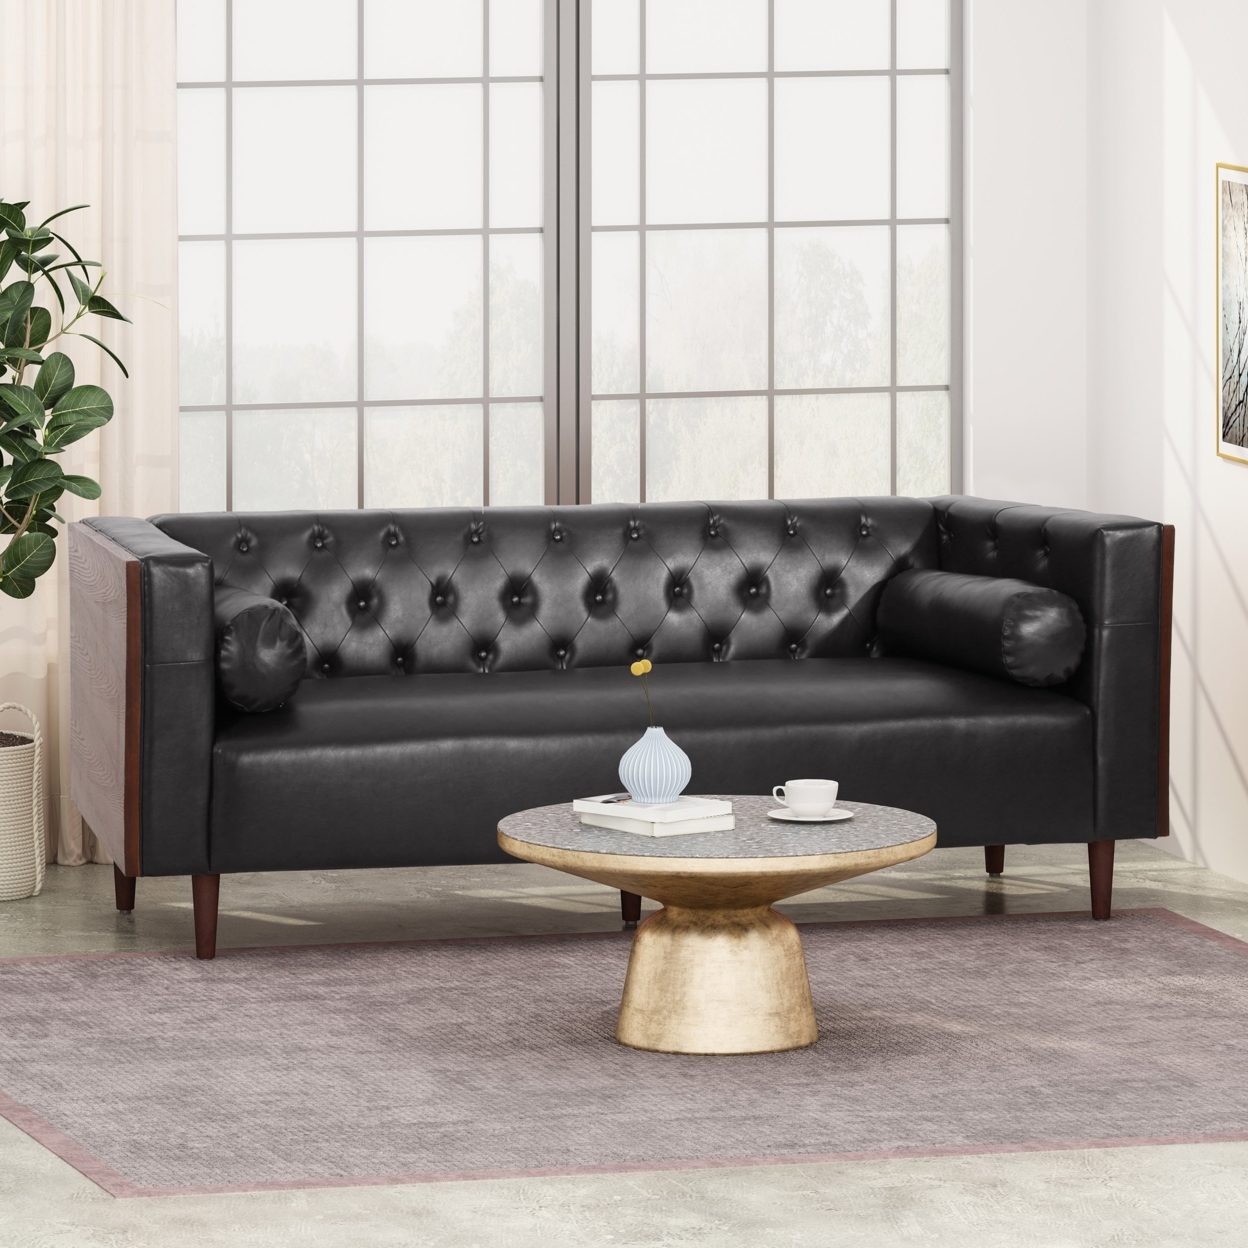 Neilan Contemporary Tufted Deep Seated Sofa With Accent Pillows - Midnight Black